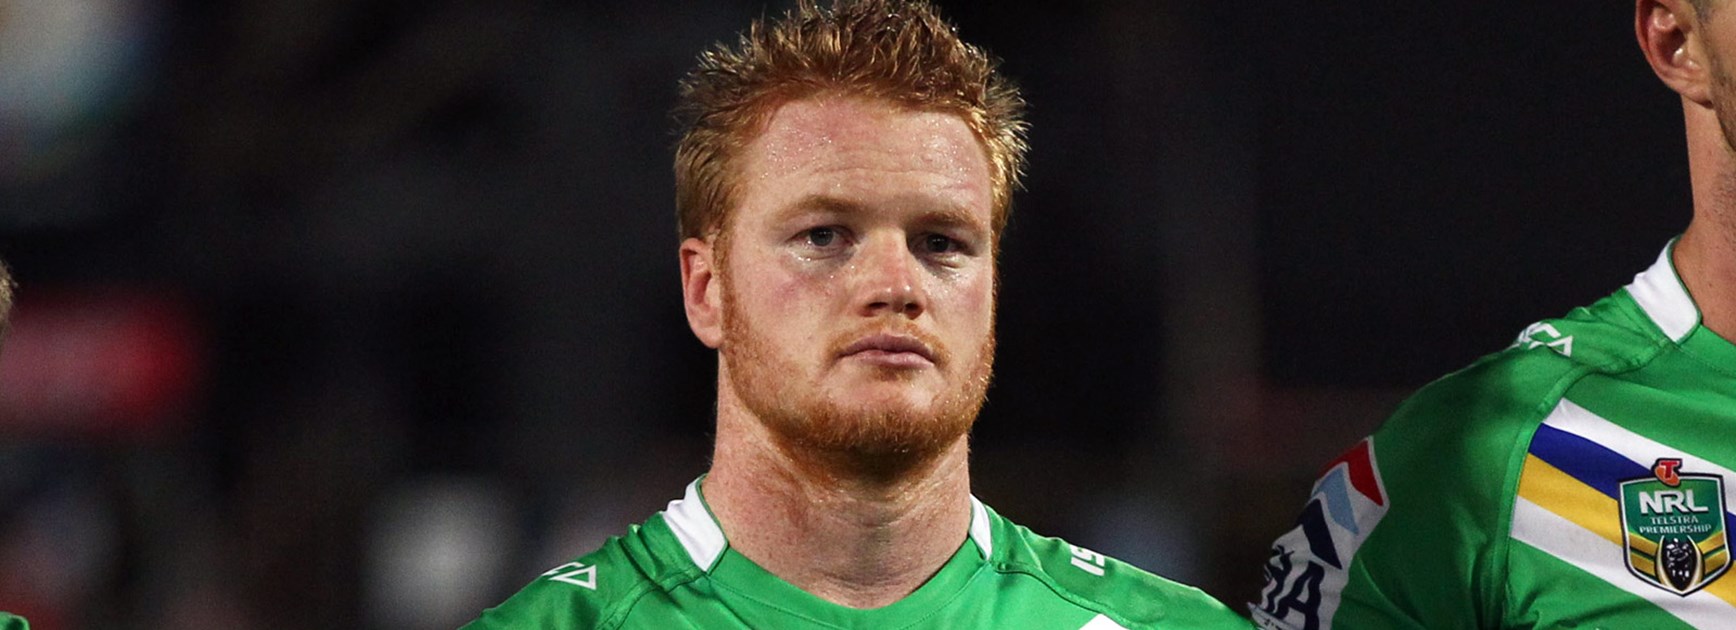 Wests Tigers have signed former Newcastle and Canberra forward Joel Edwards on a two-year deal.